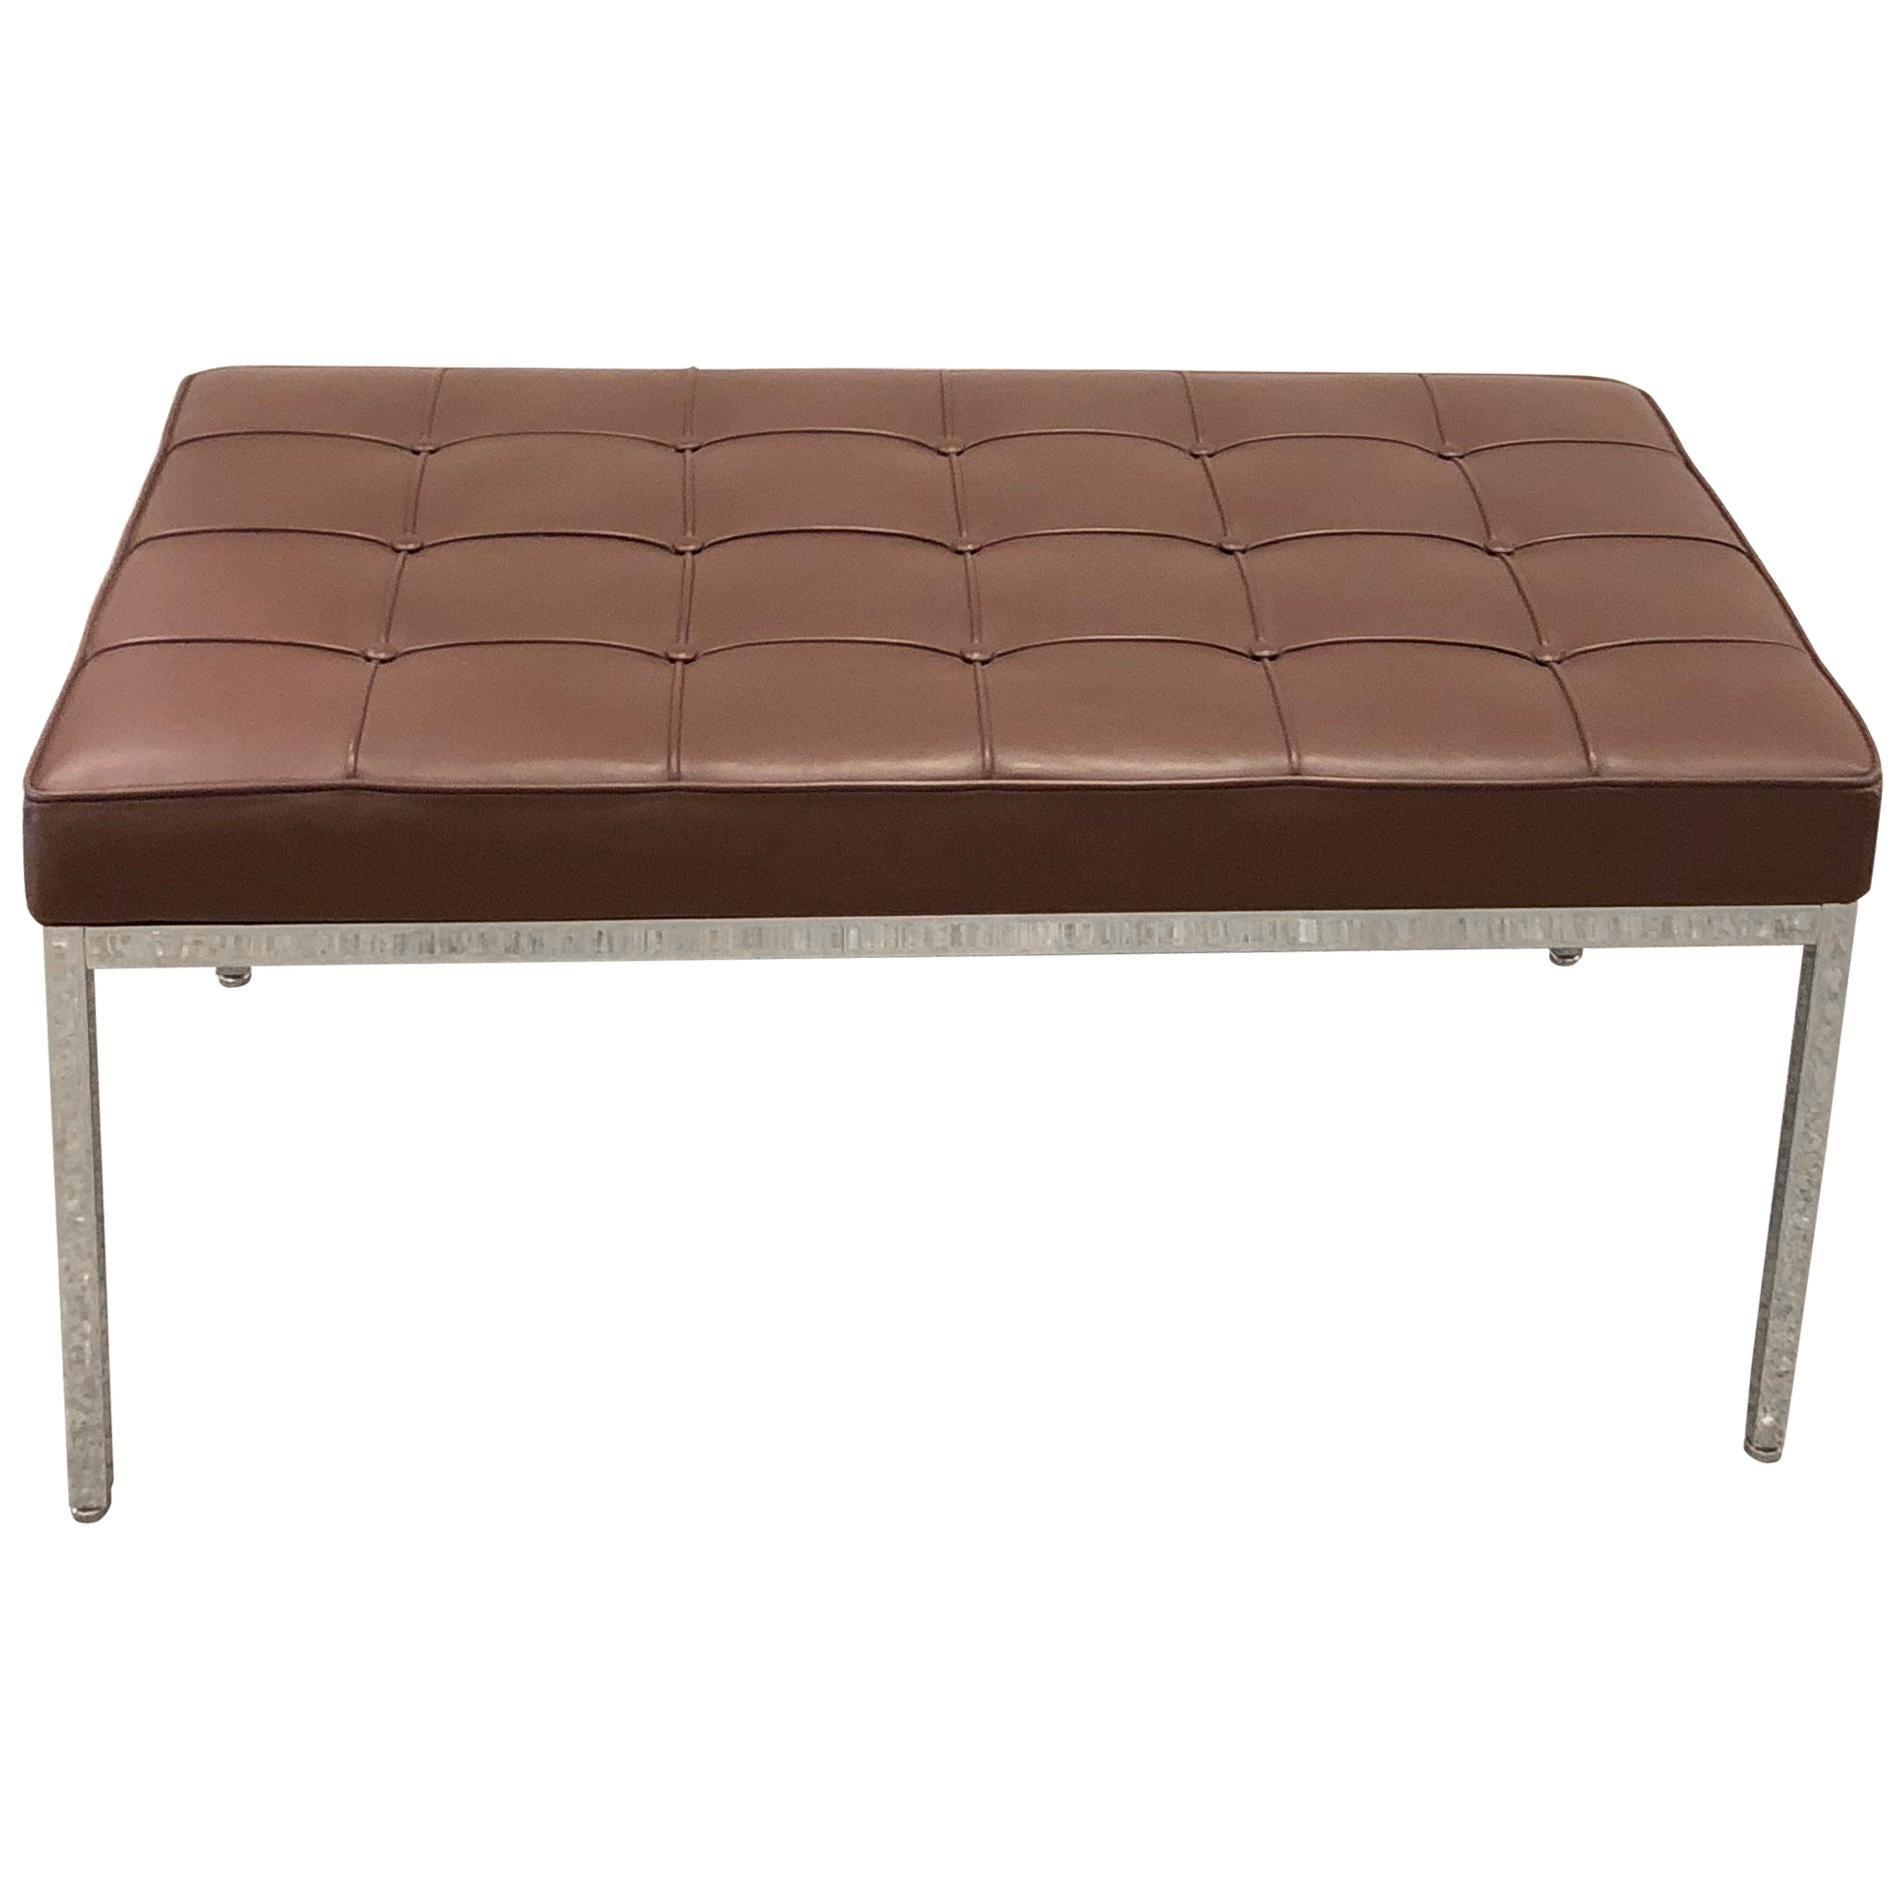 Florence Knoll Tufted Brown Leather and Chrome Bench, Mfg. Knoll